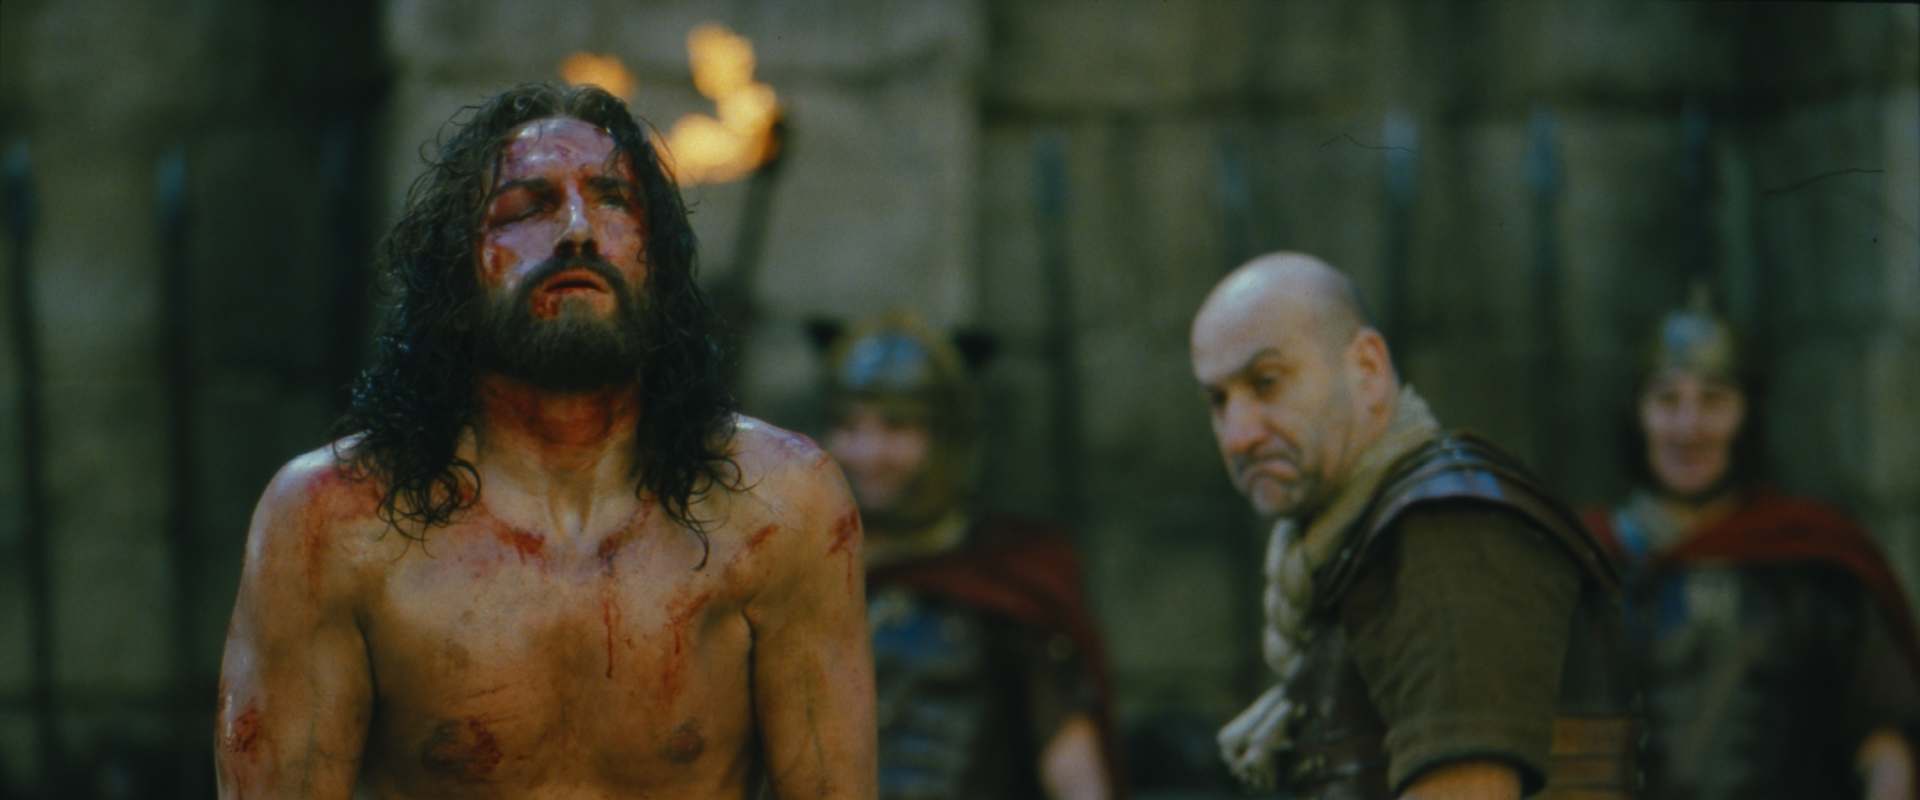 youtube the passion of christ full movie